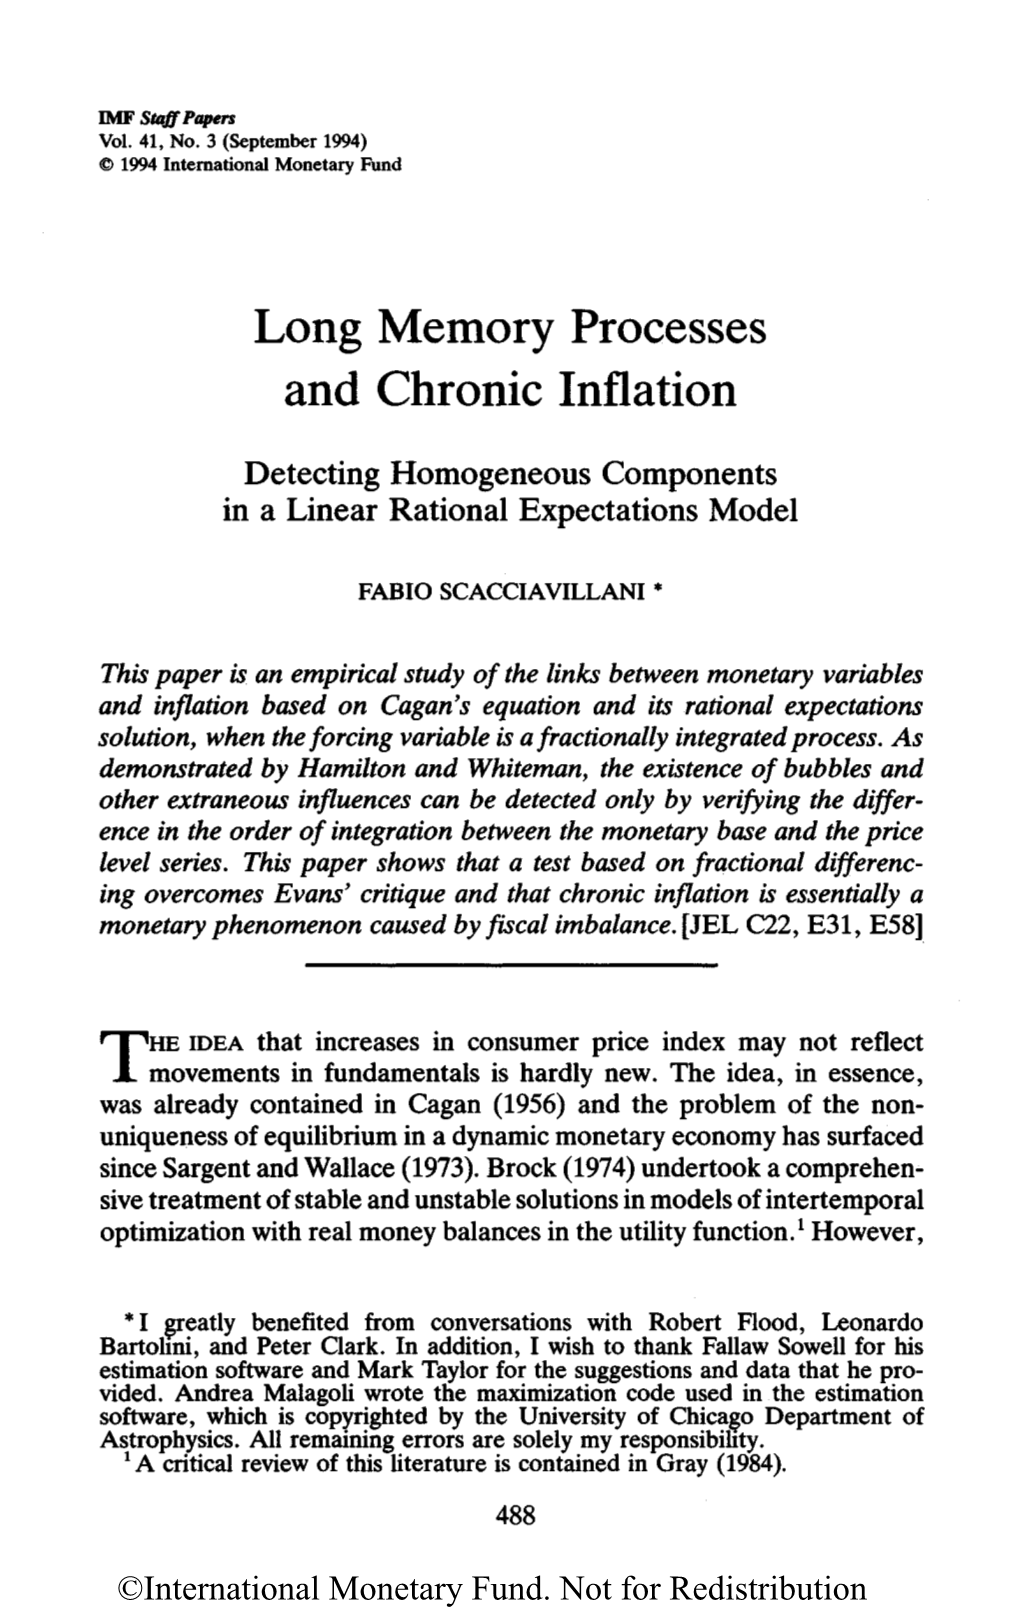 Long Memory Processes and Chronic Inflation